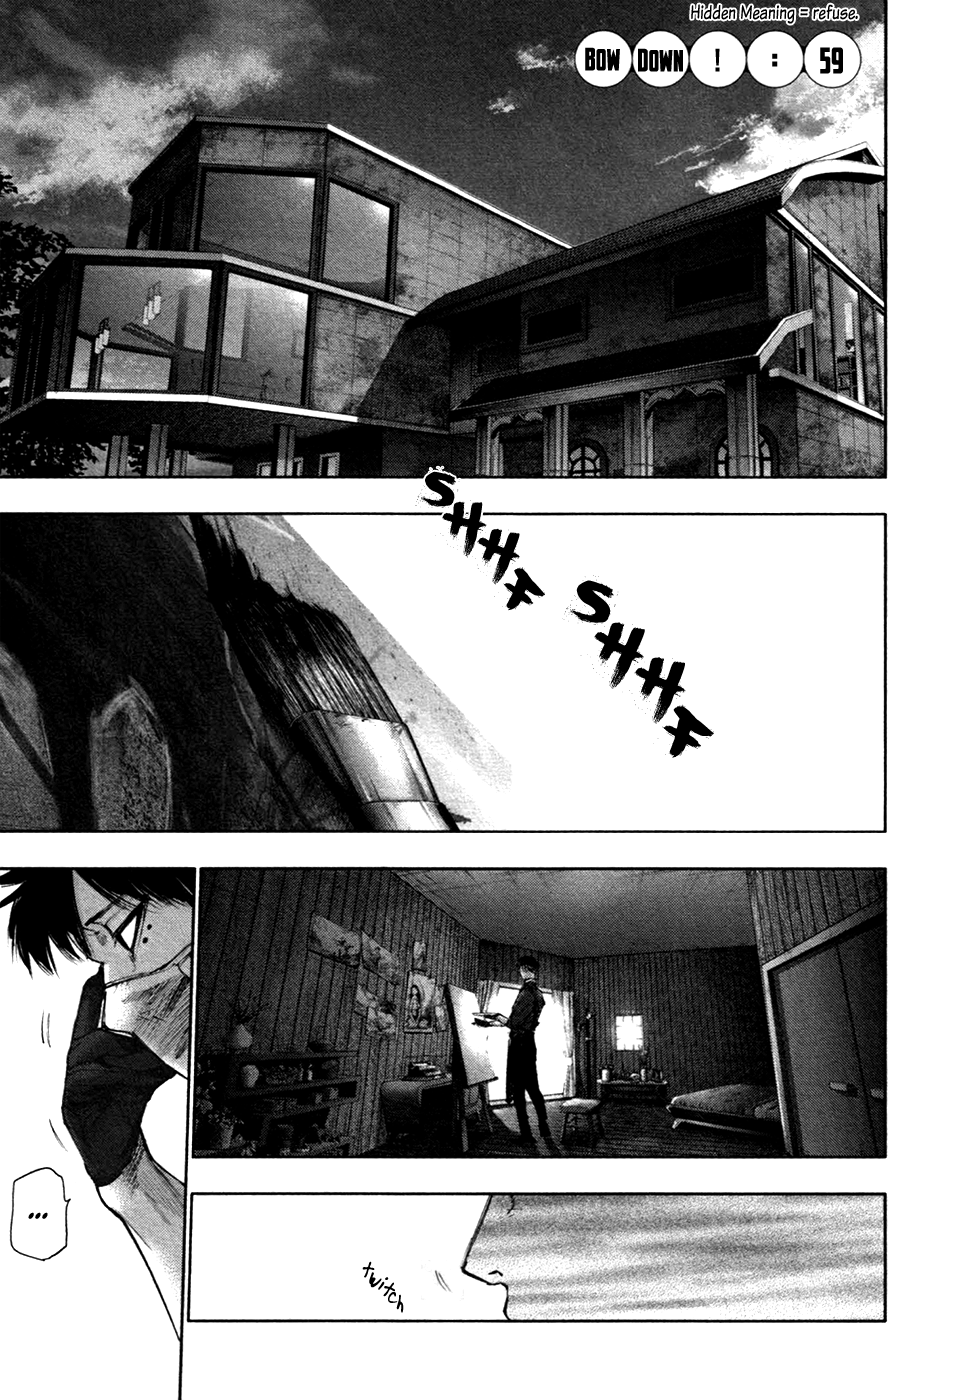 Tokyo Ghoul:re - Page 2